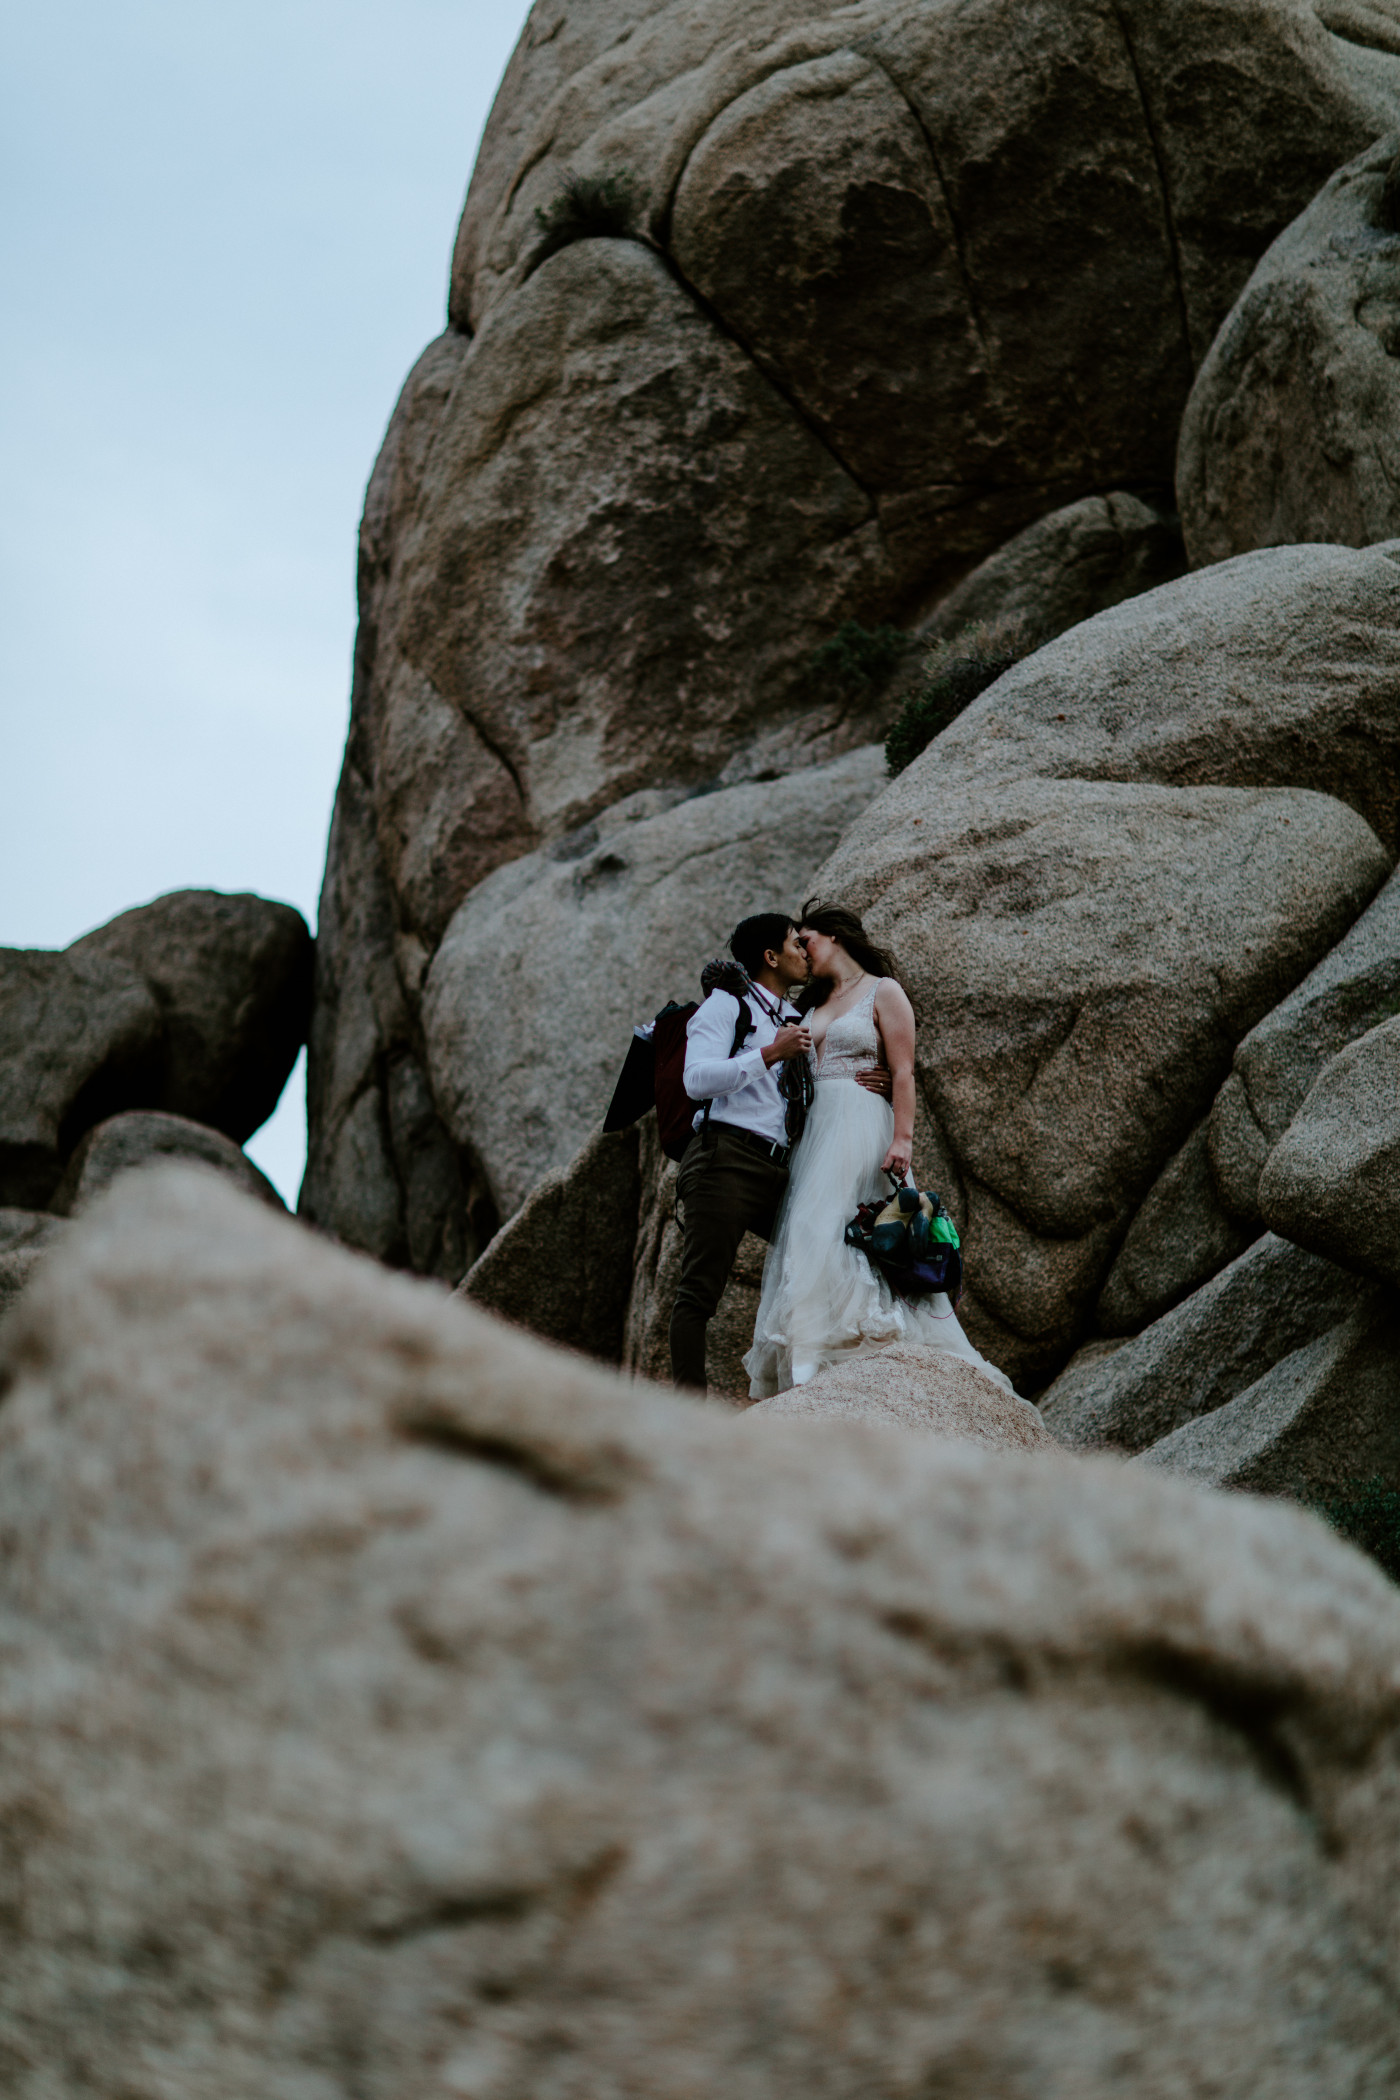 Zack and Shelby kiss on top of the rocks in Joshua Tree.